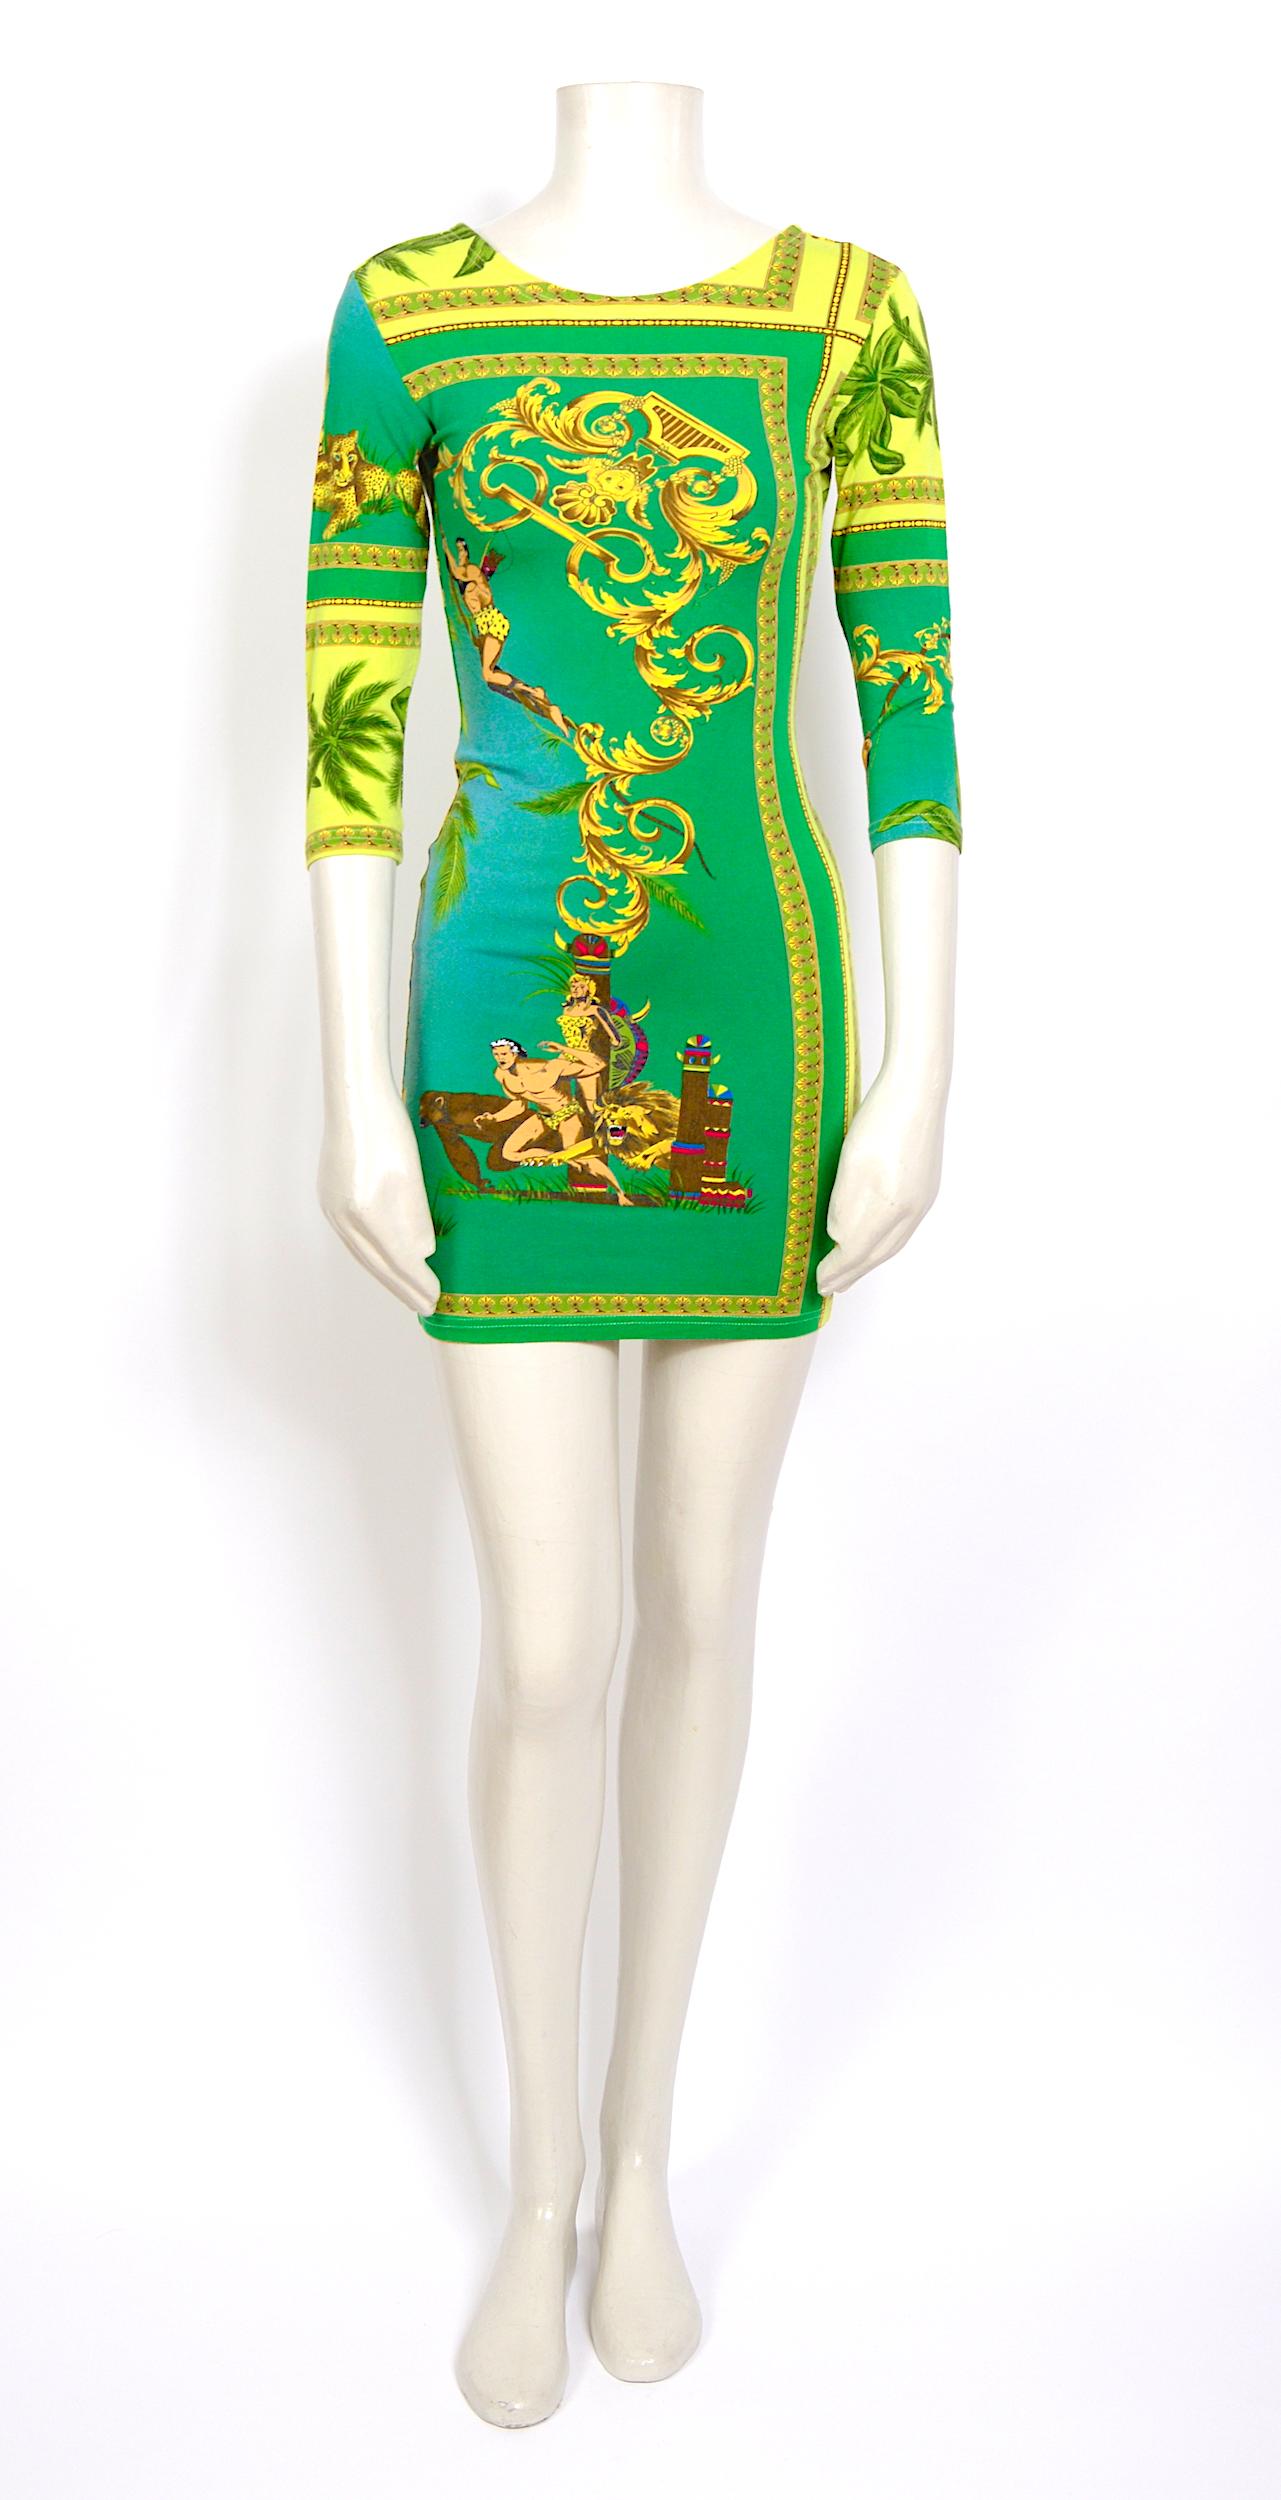 Gianni Versace, he was, he is and will always be one of the best designers ever.
Rare and desirable vintage 1990s Versace Jeans Couture stretch Tarzan & Jane bright jungle print (greens-yellows-blues-gold) dress
Made in Italy - size 28/42